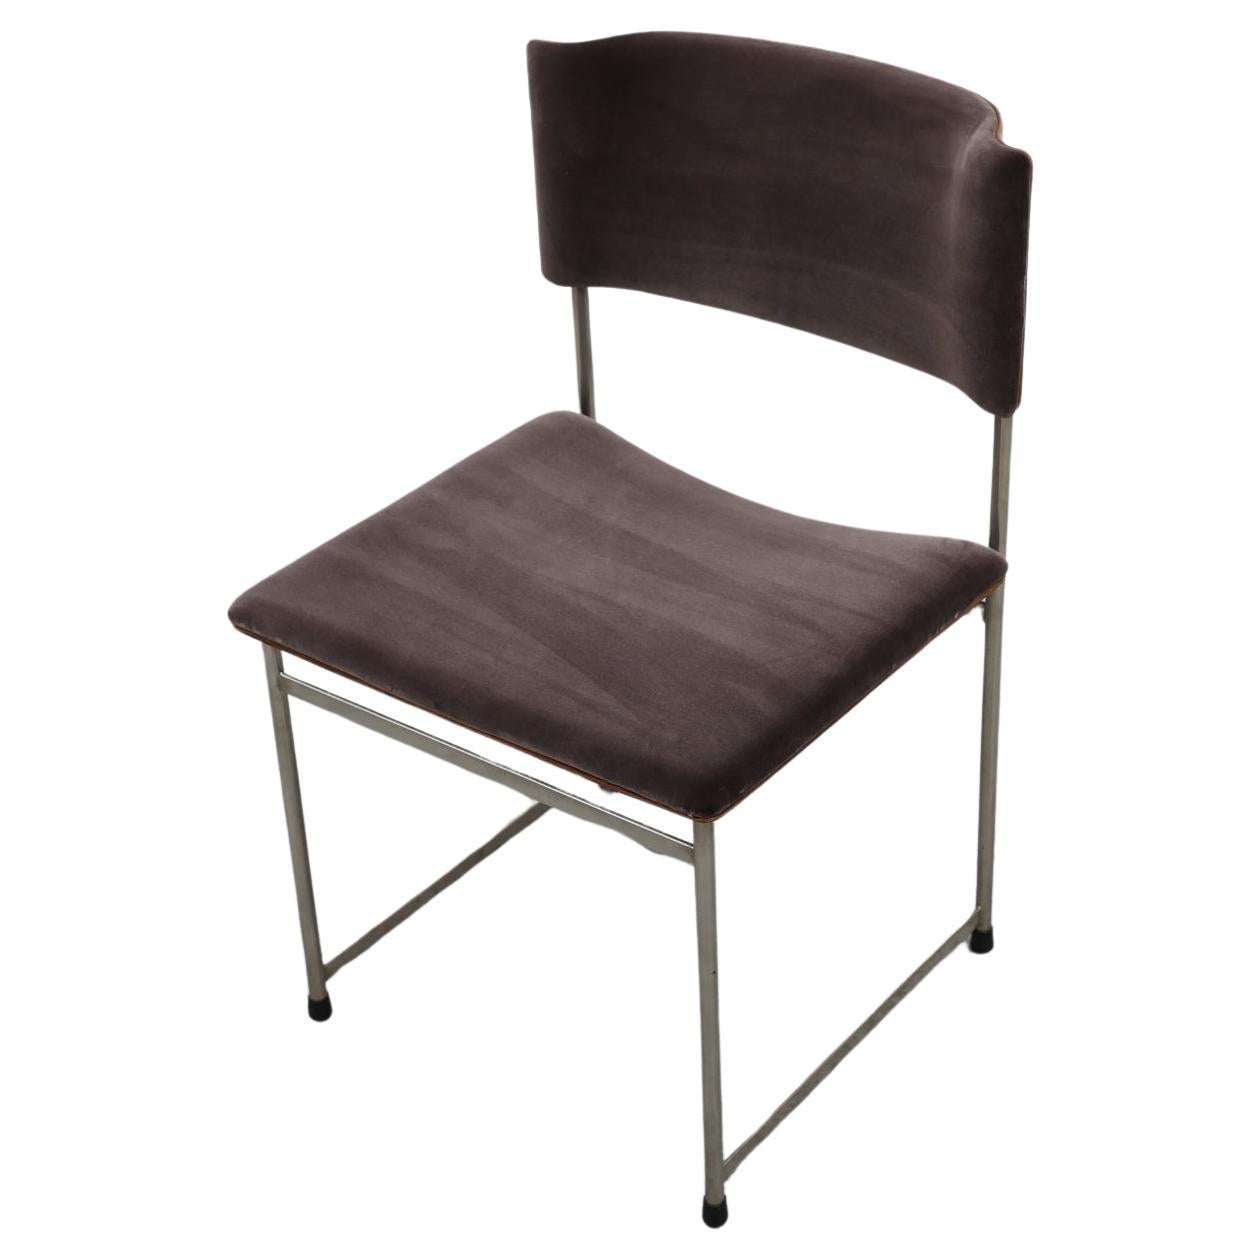 Single Cees Braakman Rosewood and Chrome ‘SM08’ Dining Chair for Pastoe, 1960s For Sale